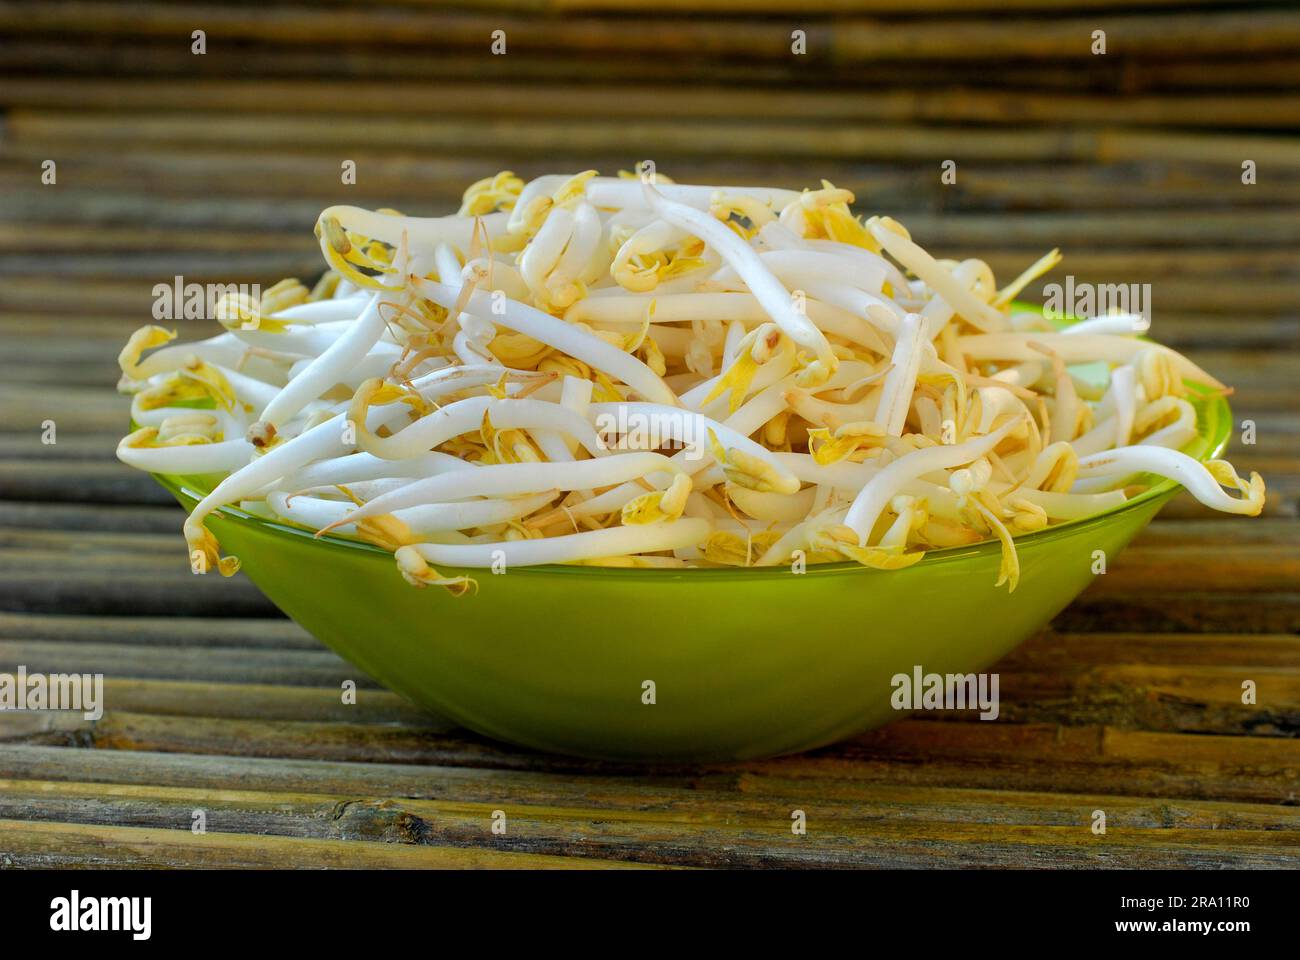 Mung beanstree sprouts in shell (Vigna mungo) (Phaseolus mungo), Mung beans (Phaseolus radiatus) (Vigna radiata) Seedlings Stock Photo